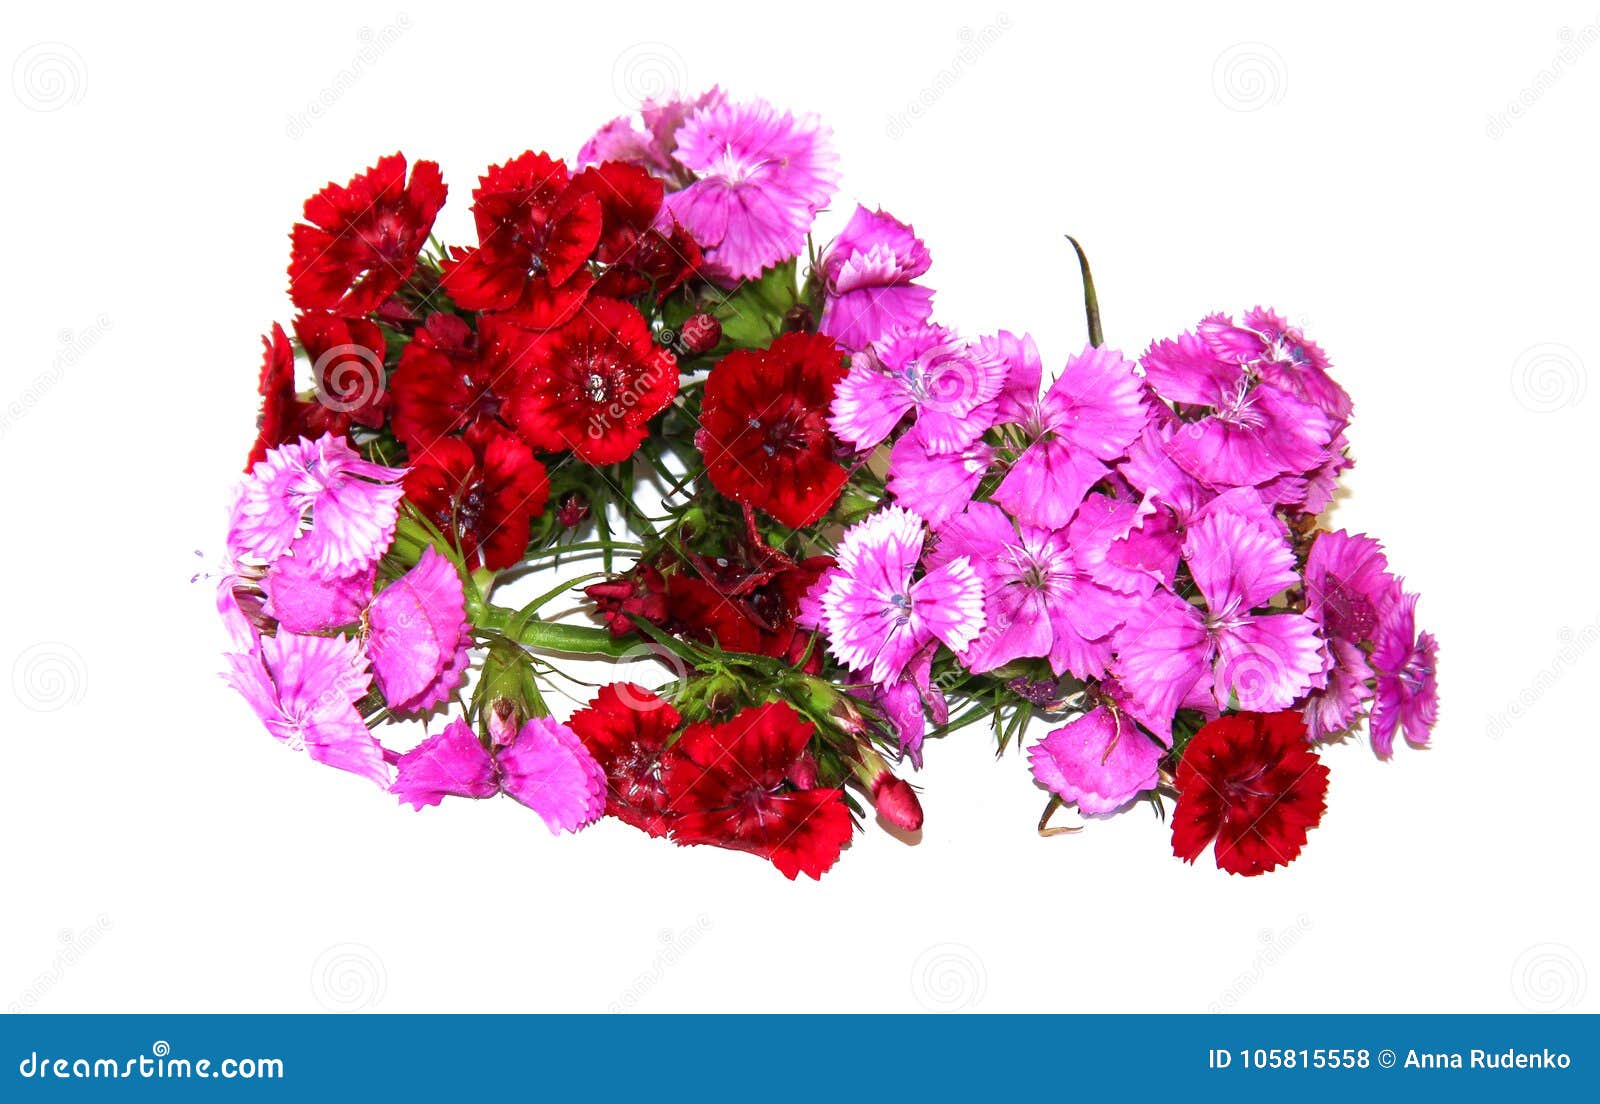 The Flowers of Charming Small Colored Carnations Stock Photo - Image of ...